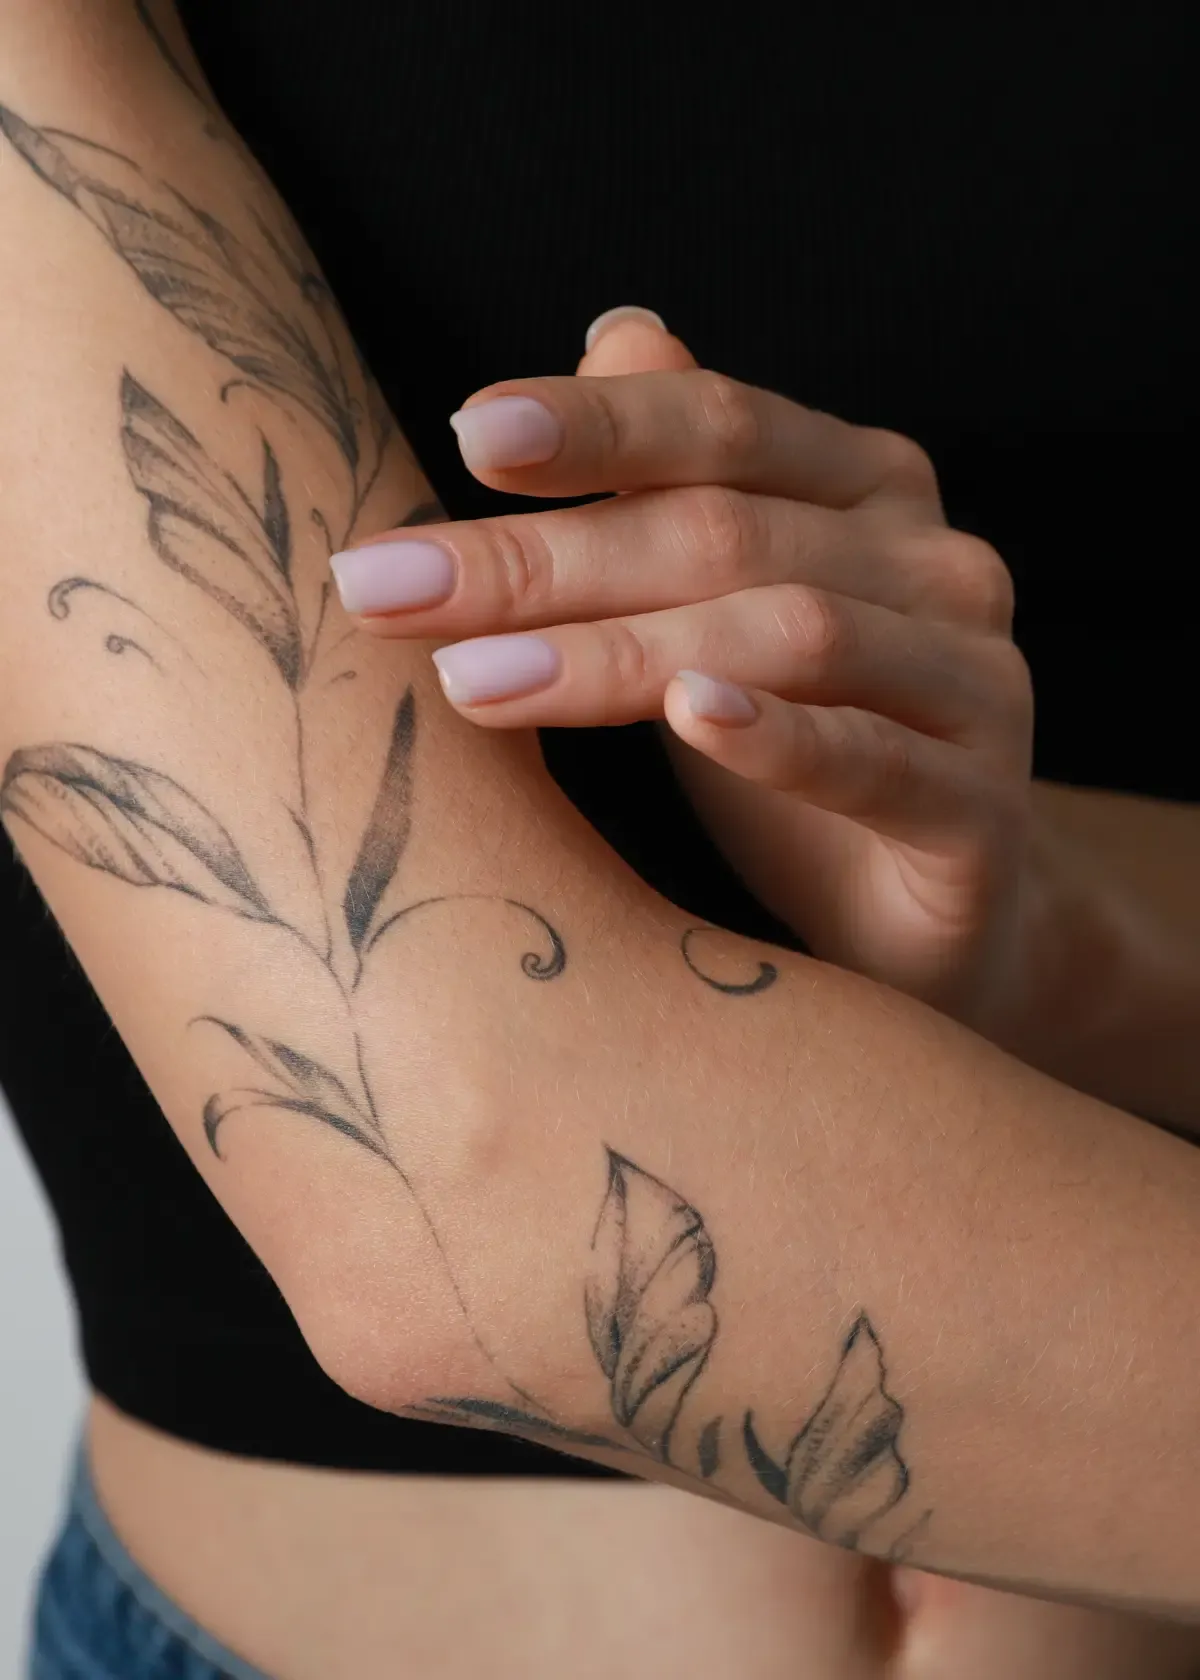 Is Baby Lotion Good for Tattoos? Unraveling the Do's and Don'ts for Tattoo Aftercare